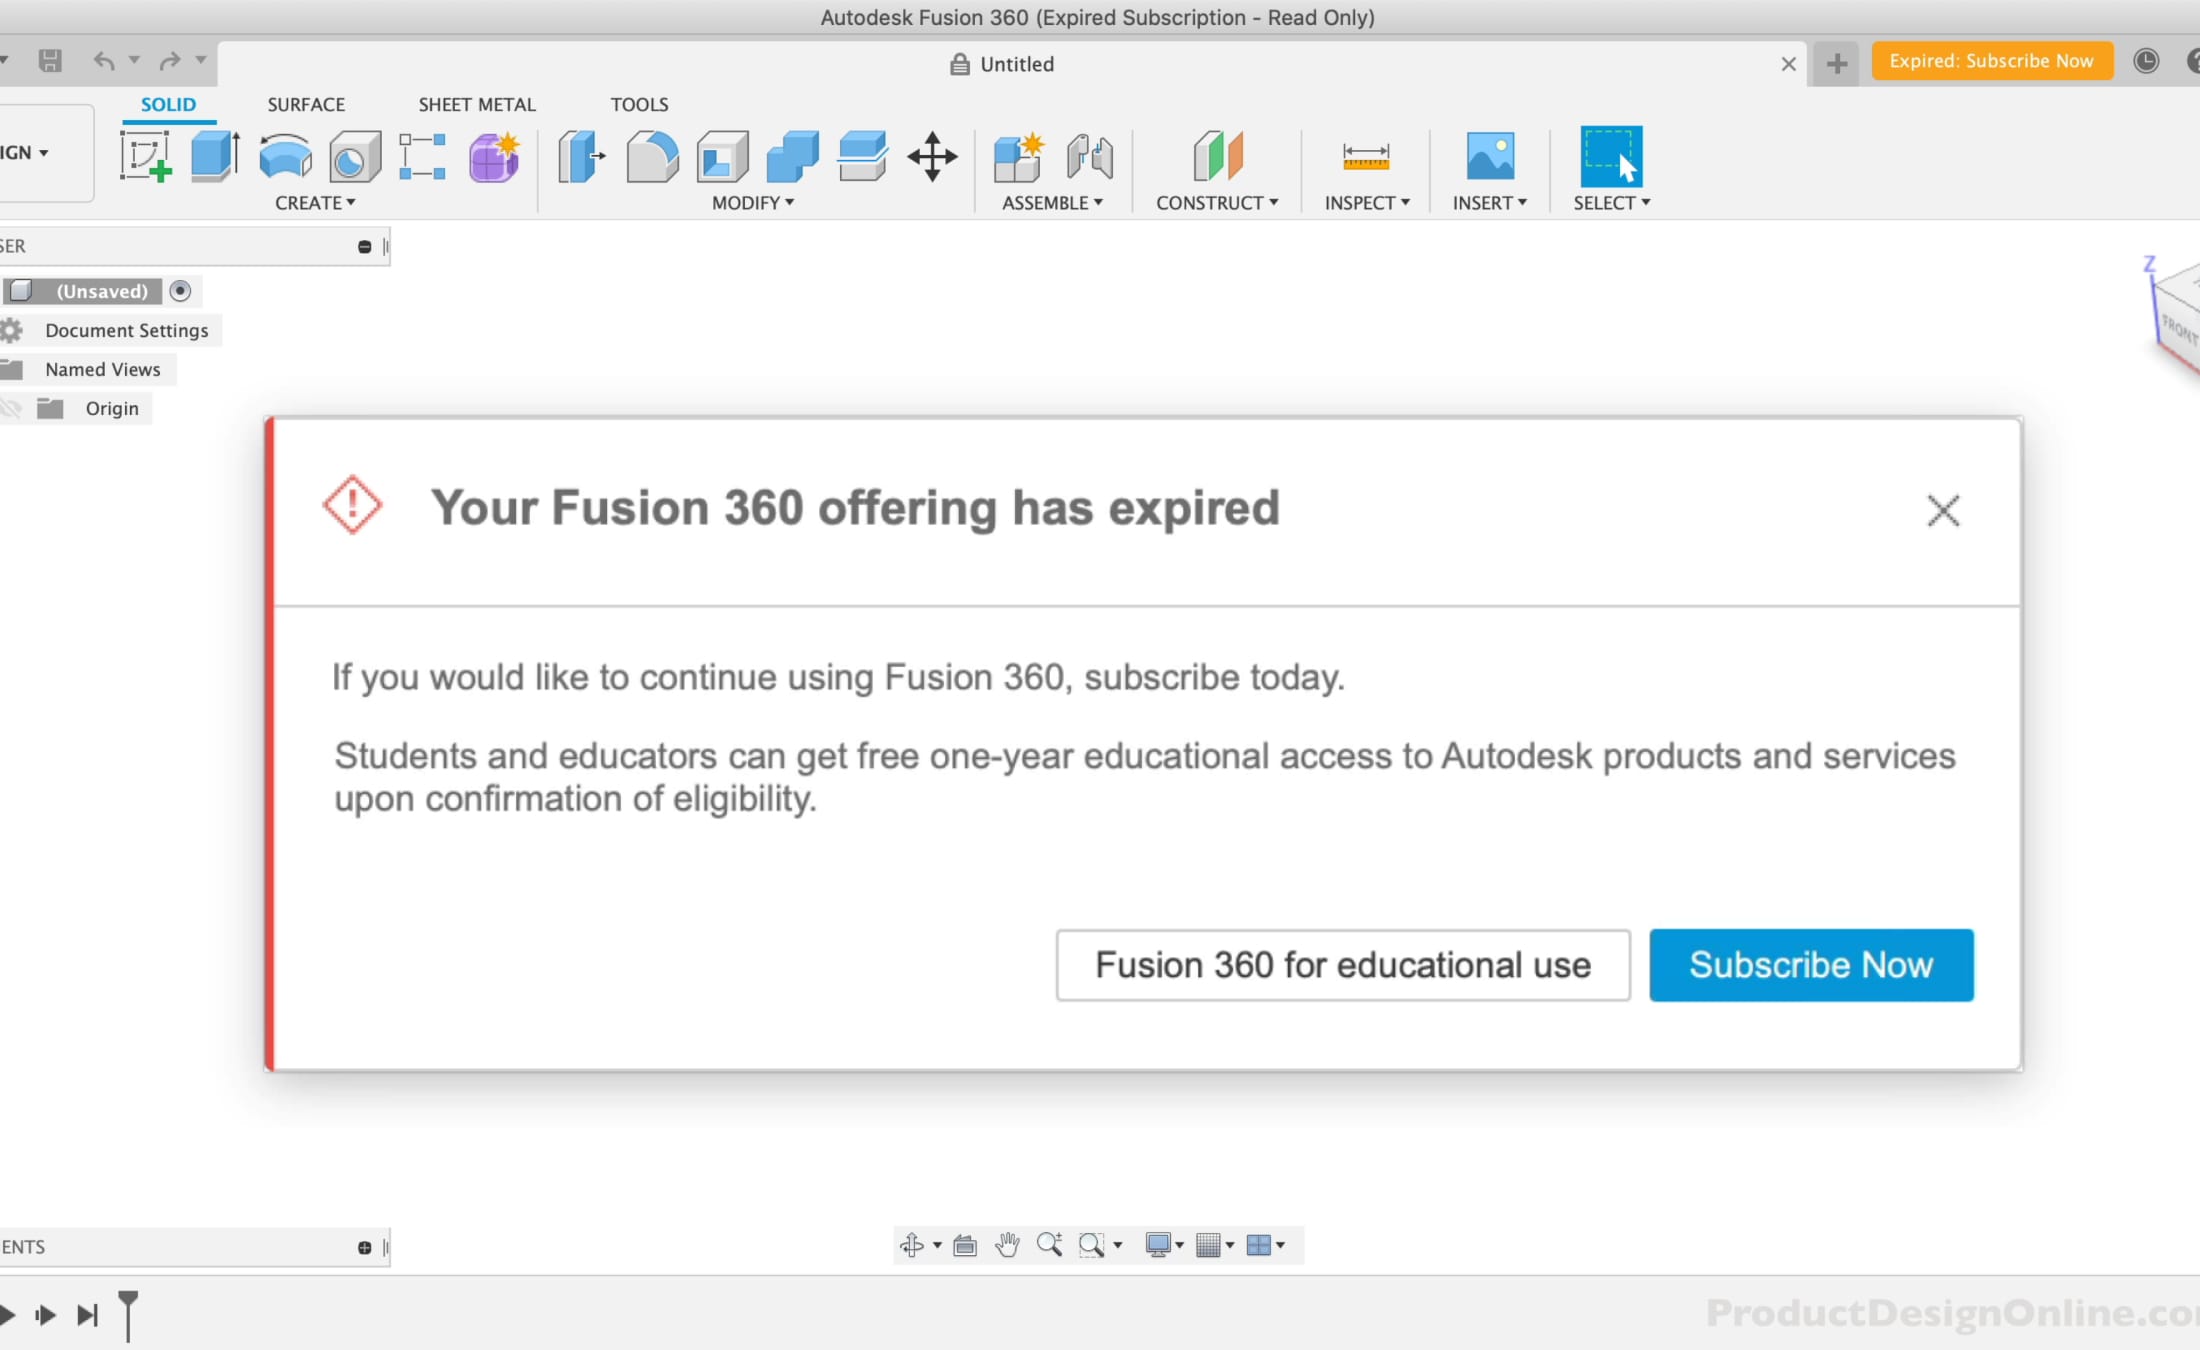 How to Renew the Fusion 360 Personal Use License for Free